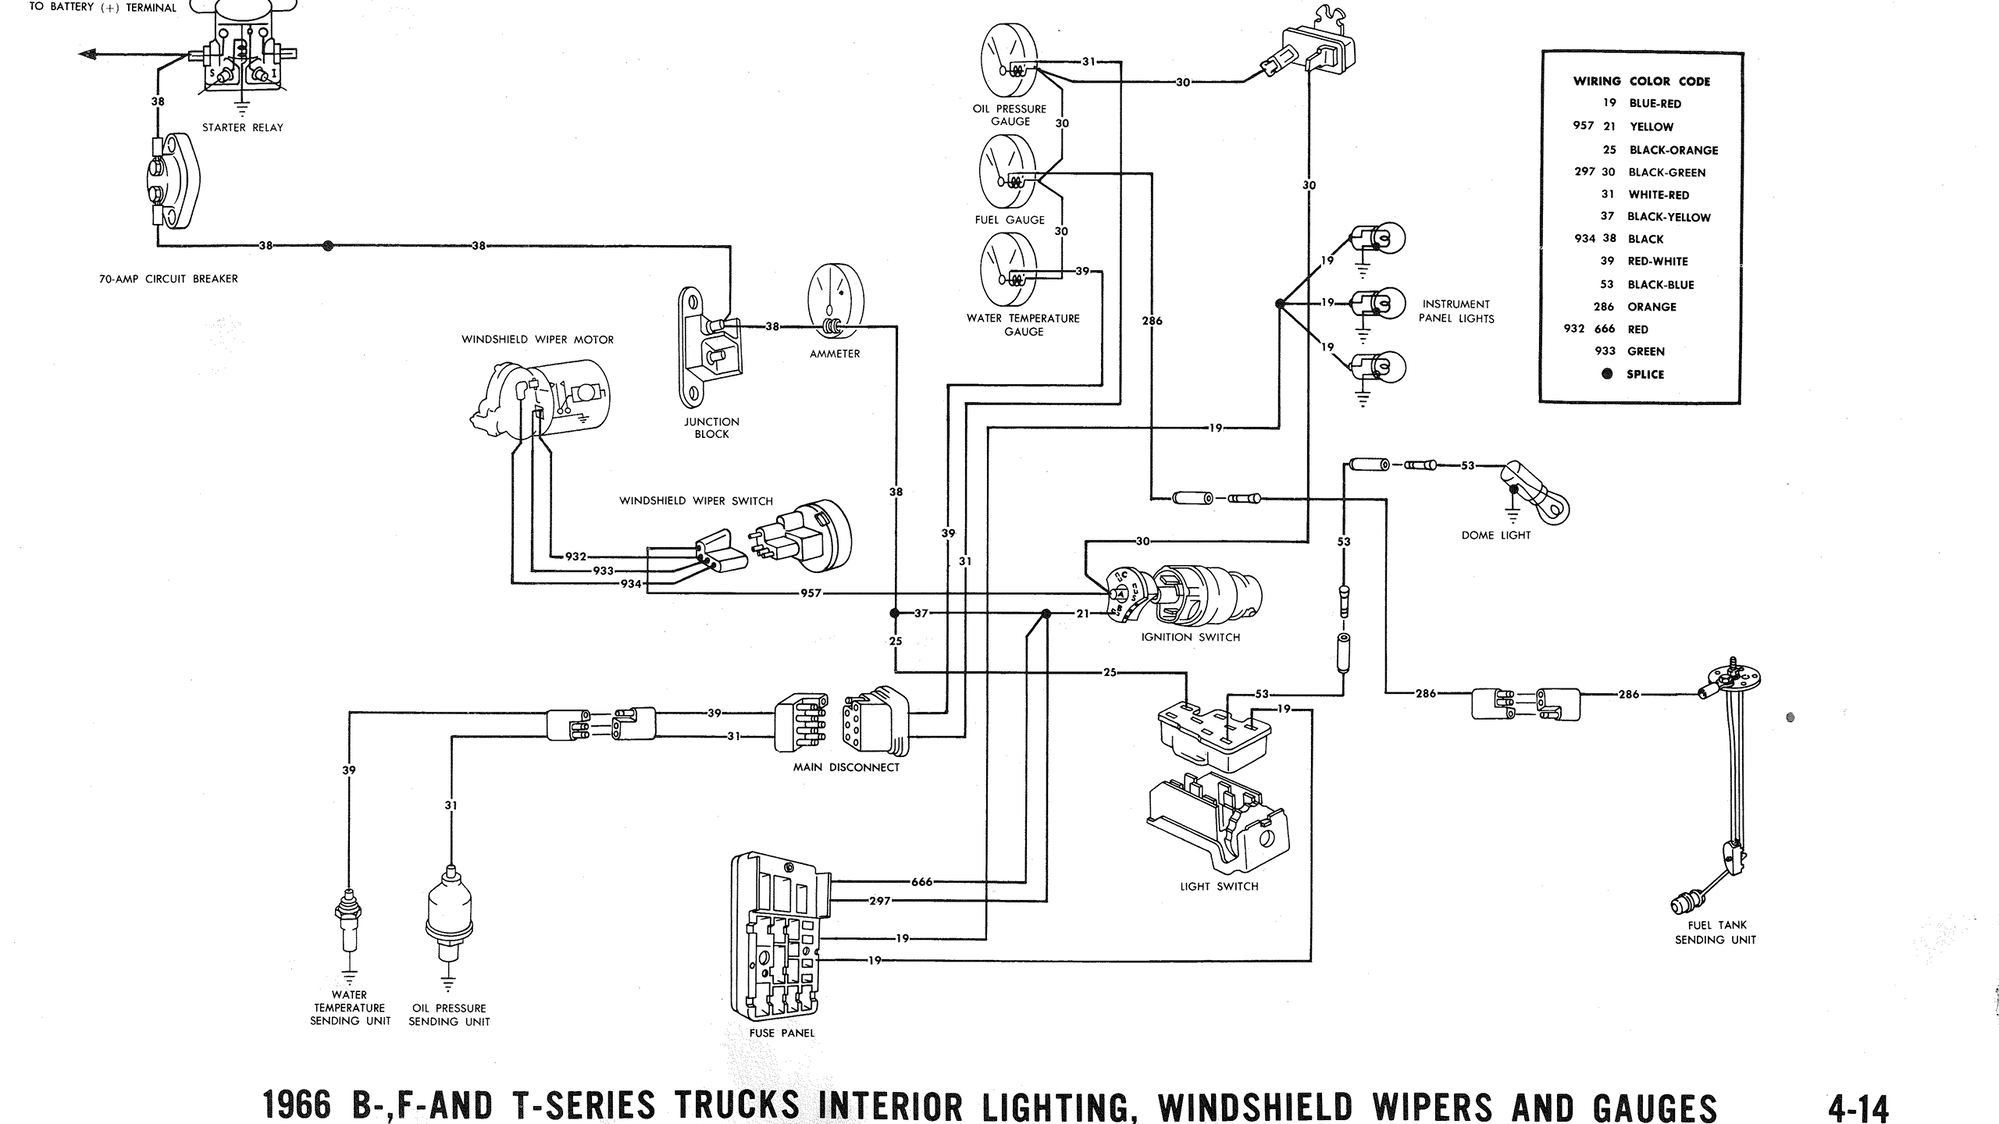 1966 wiper switch wiring questions ford truck enthusiasts forums 1966 wiper switch wiring questions